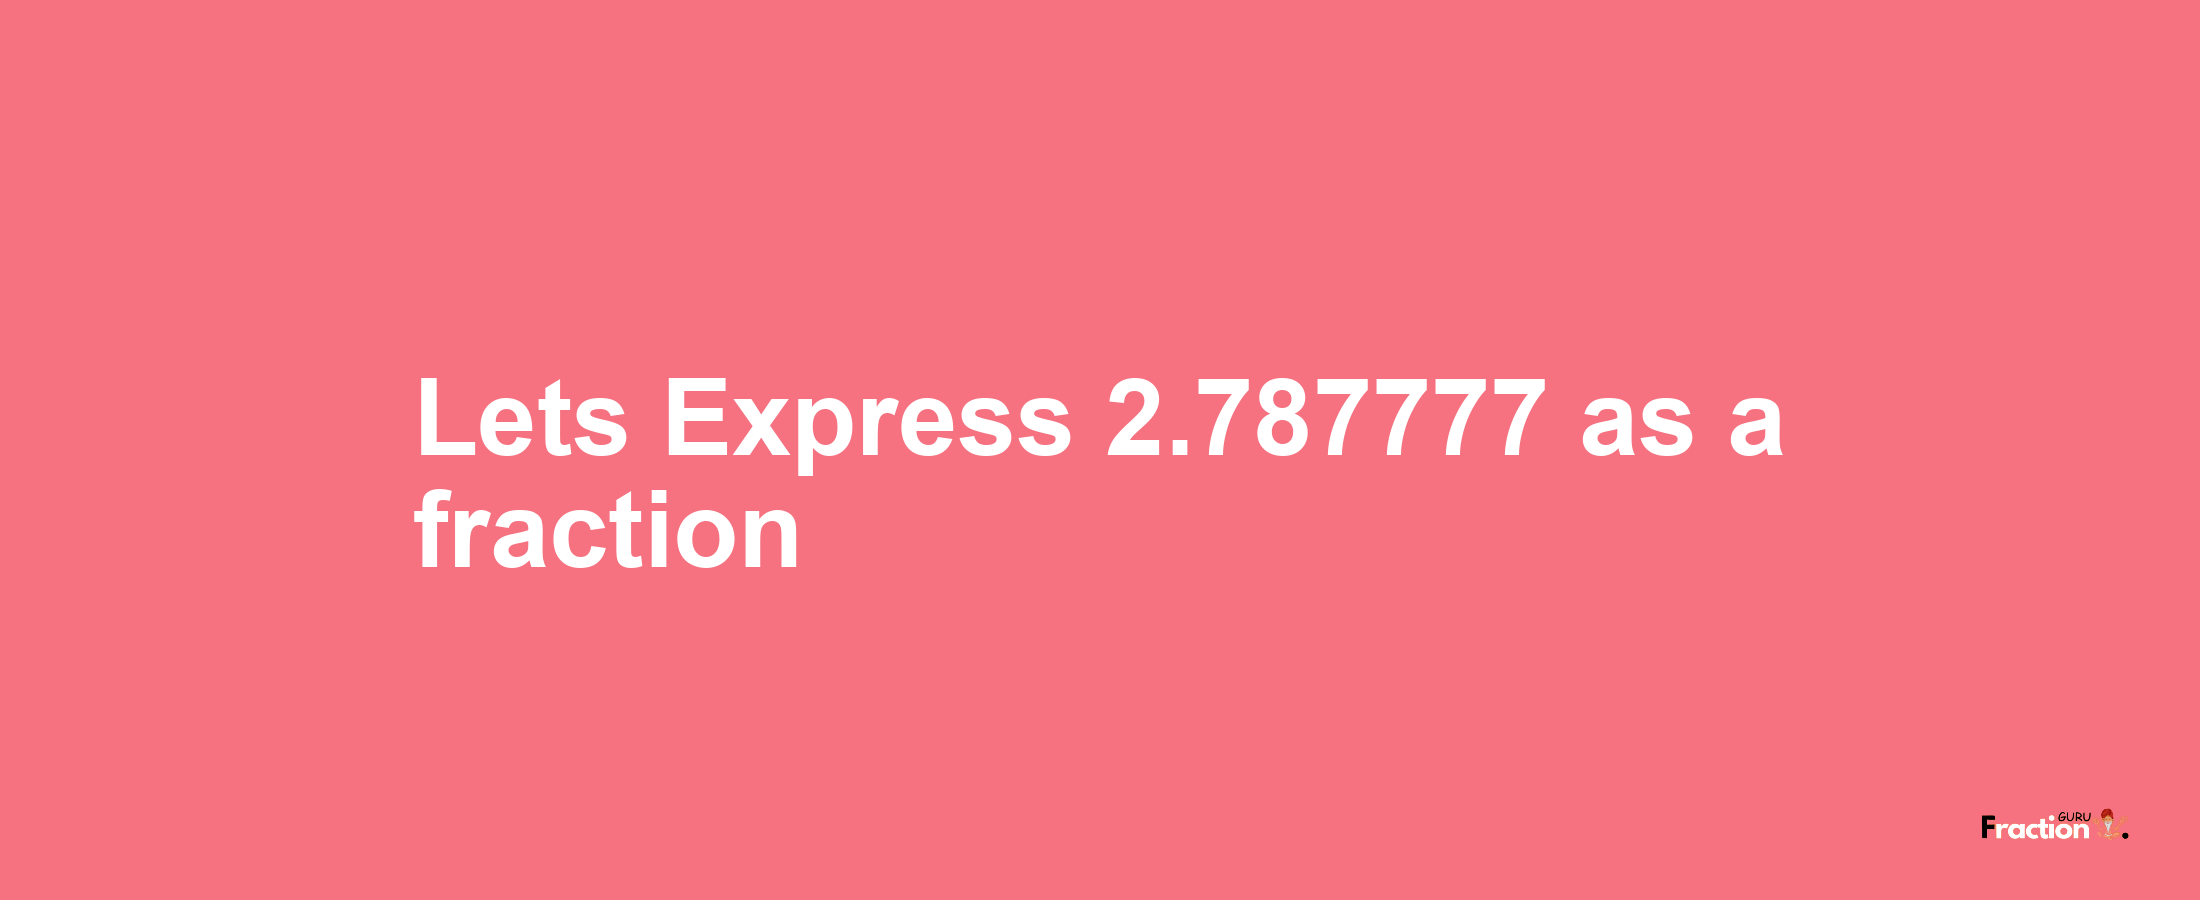 Lets Express 2.787777 as afraction